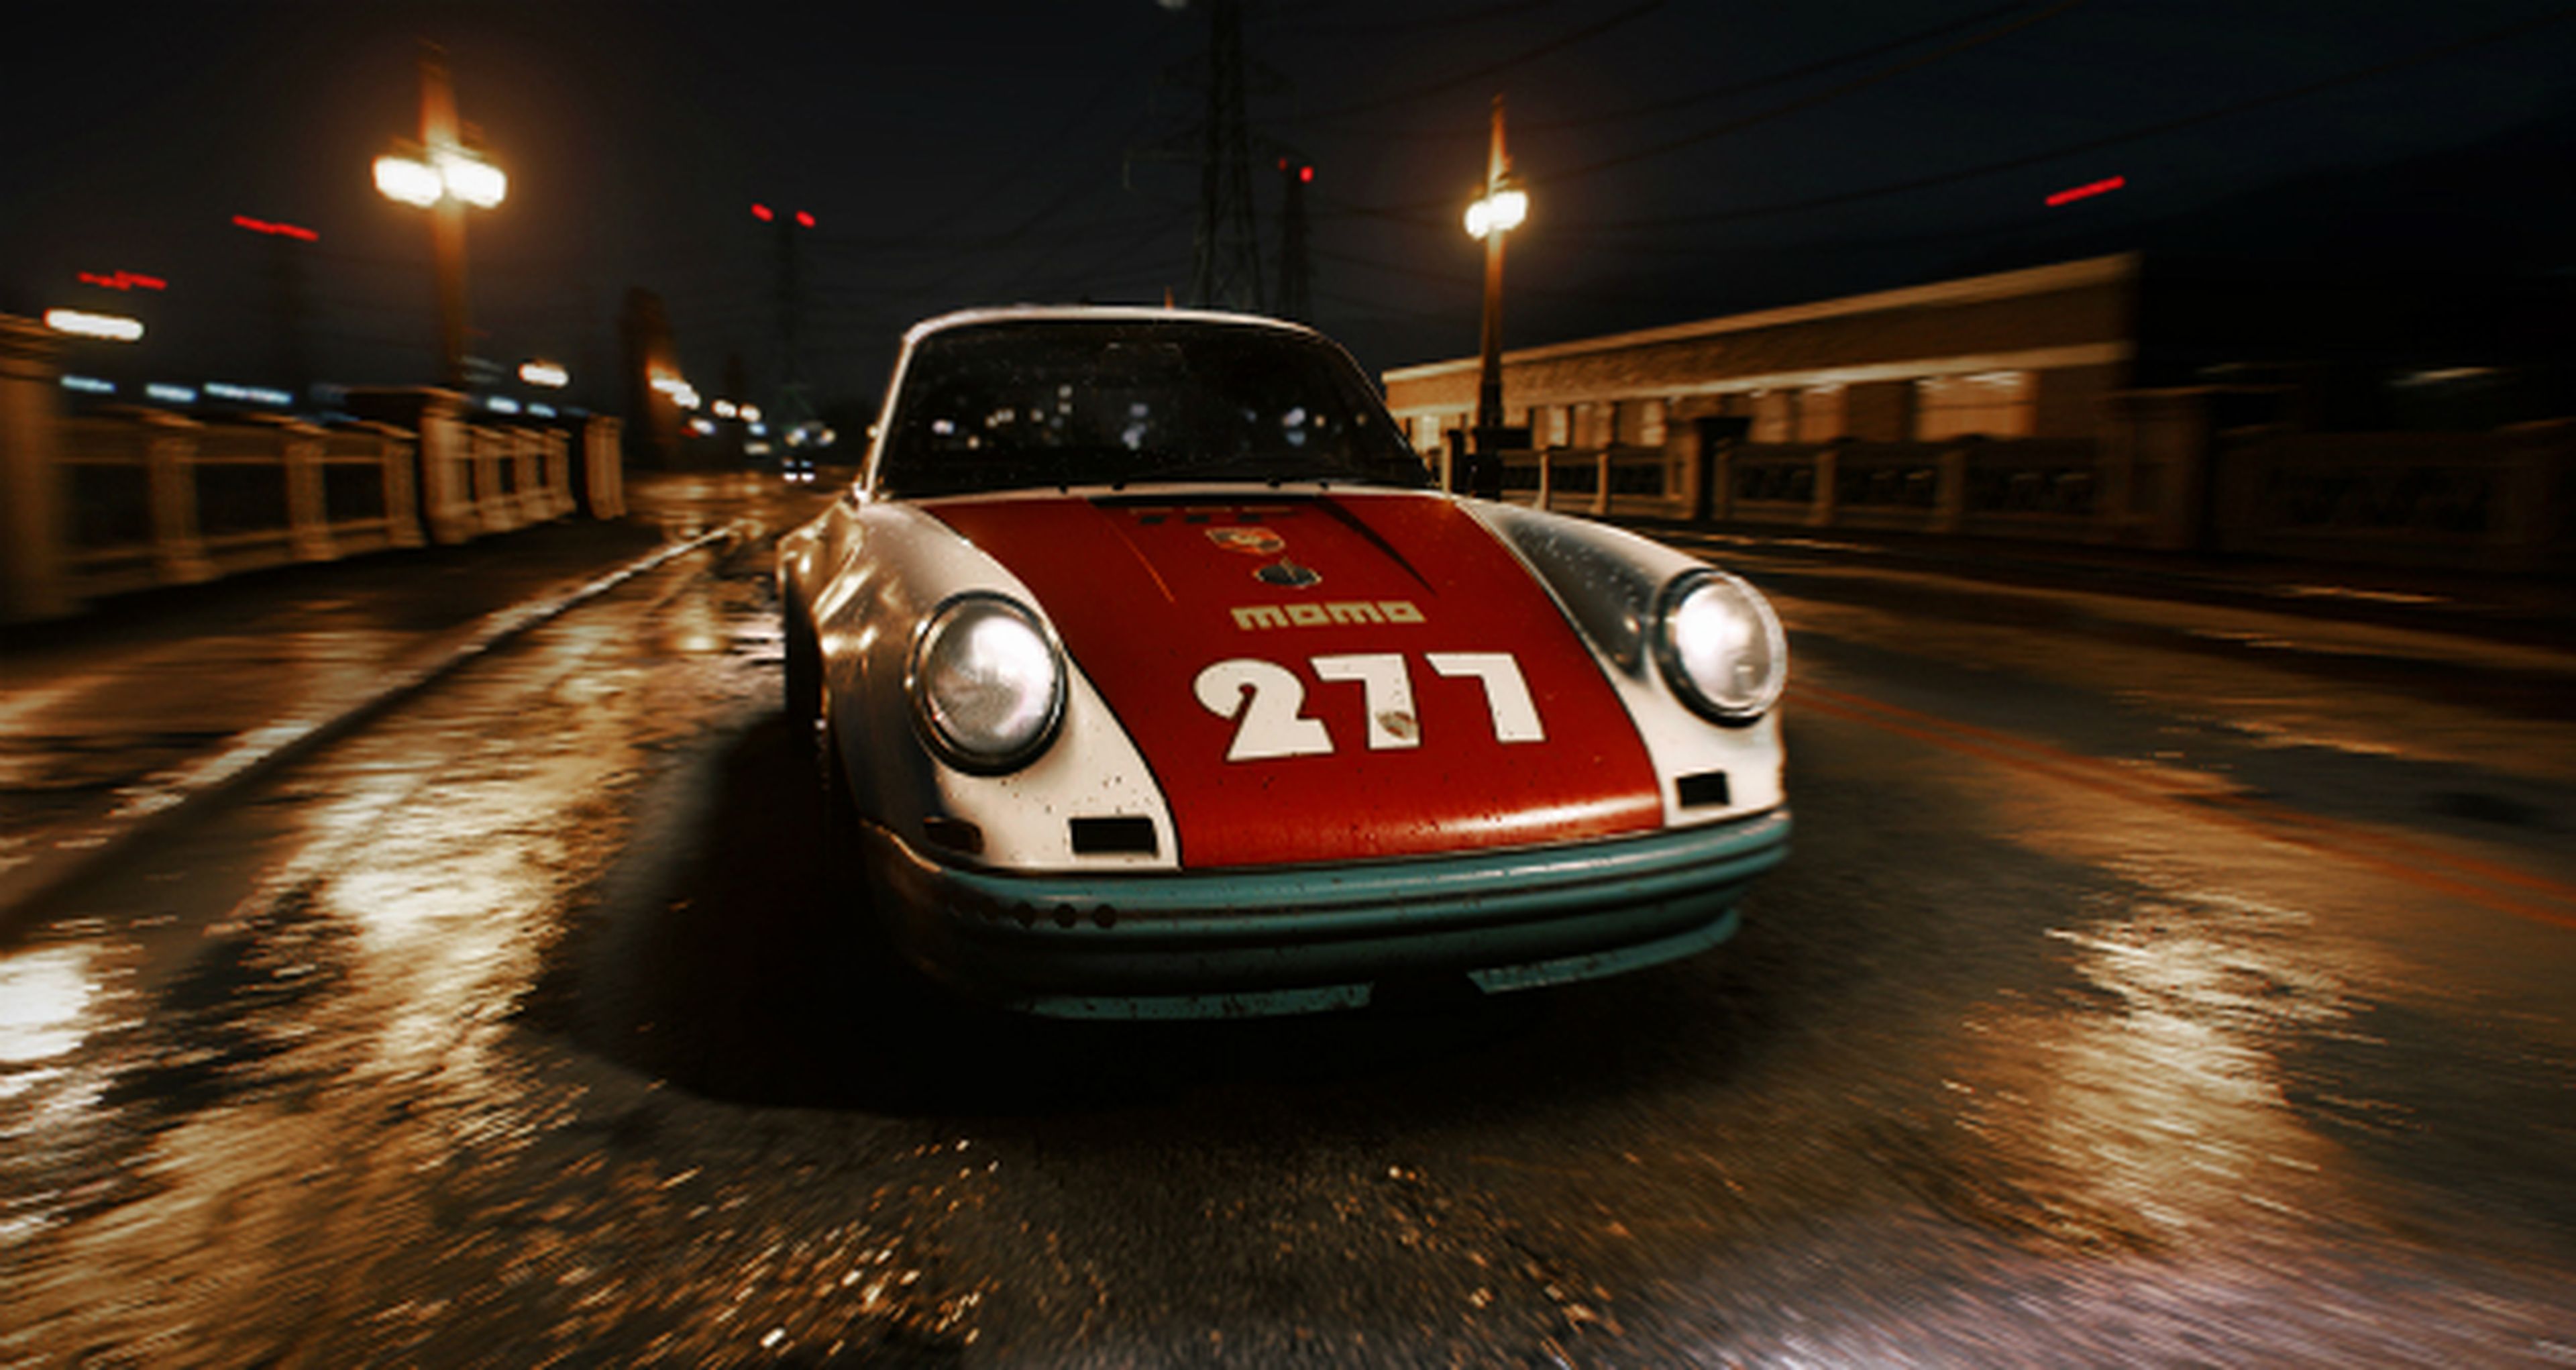 Need for Speed, Ghost Games promete DLCs más ambiciosos